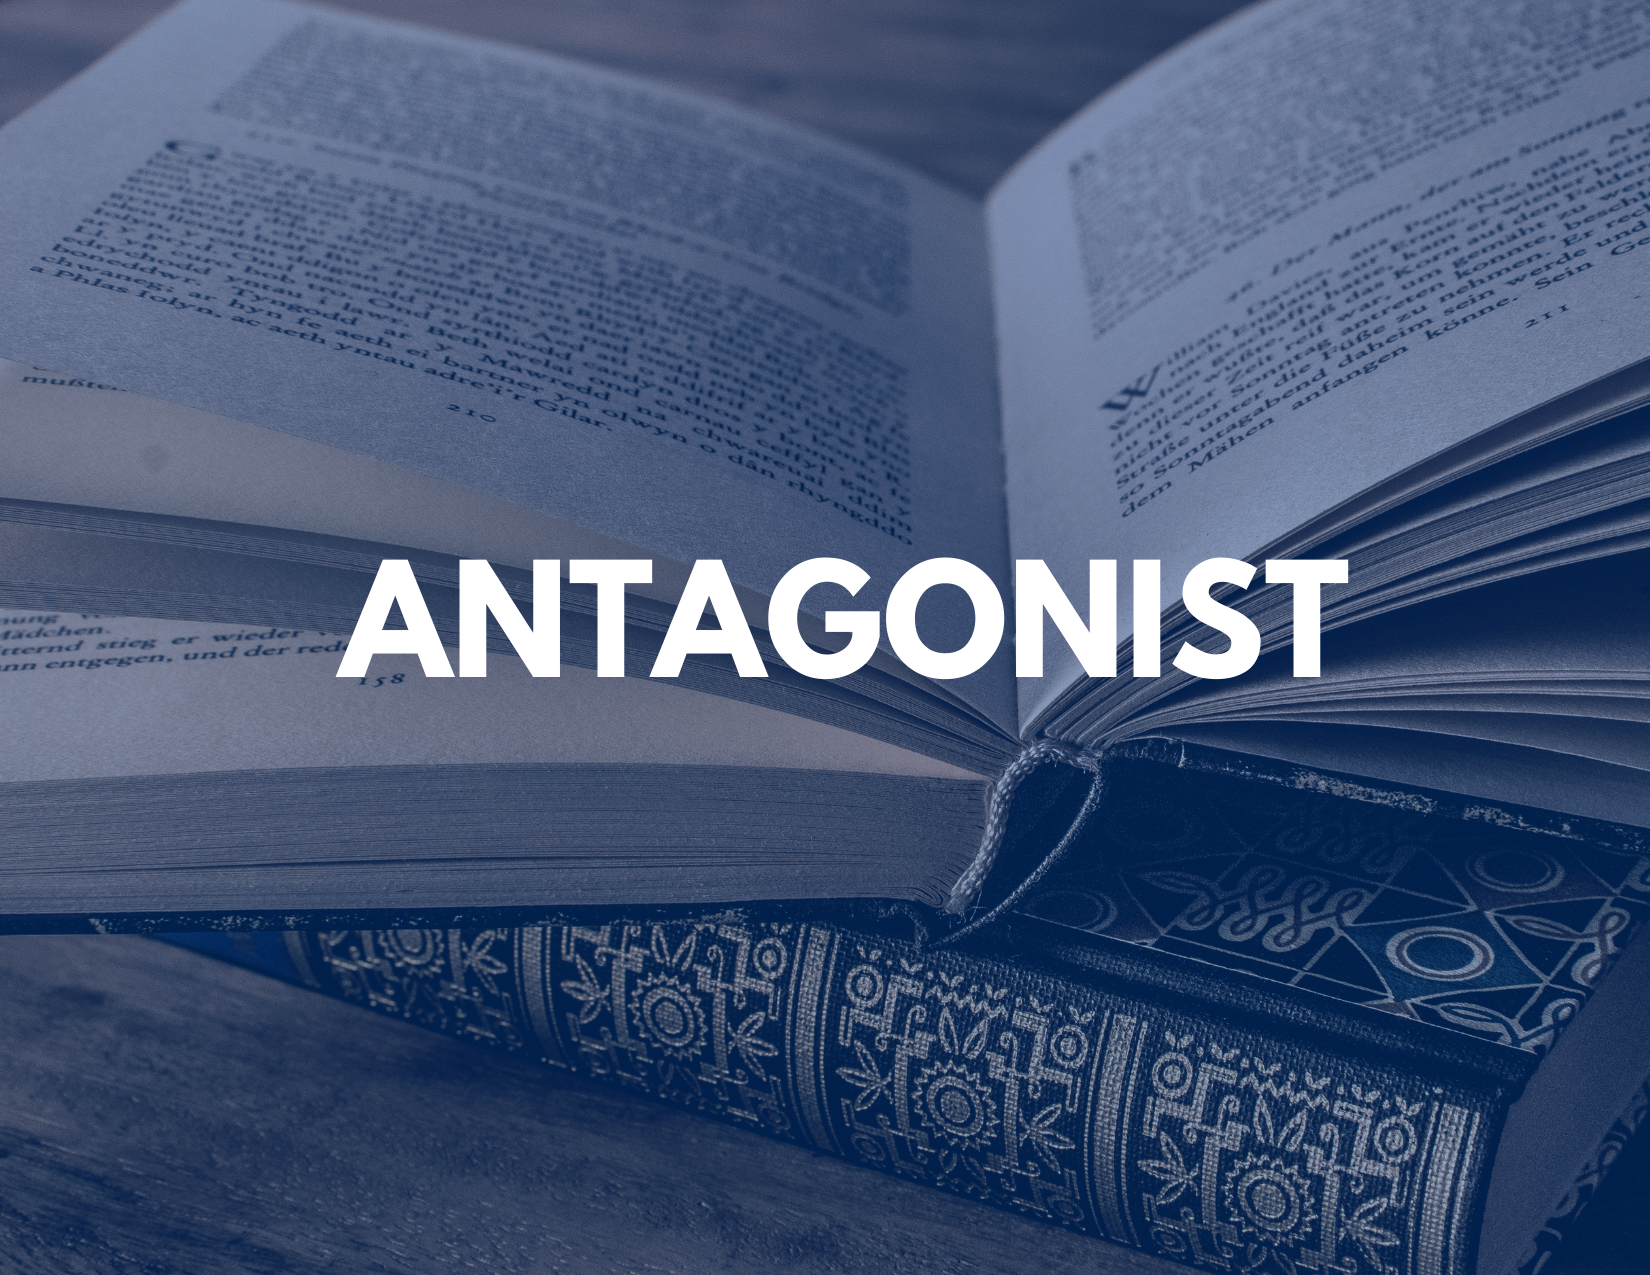 Picture of books in the background and the word "Antagonist" in the front